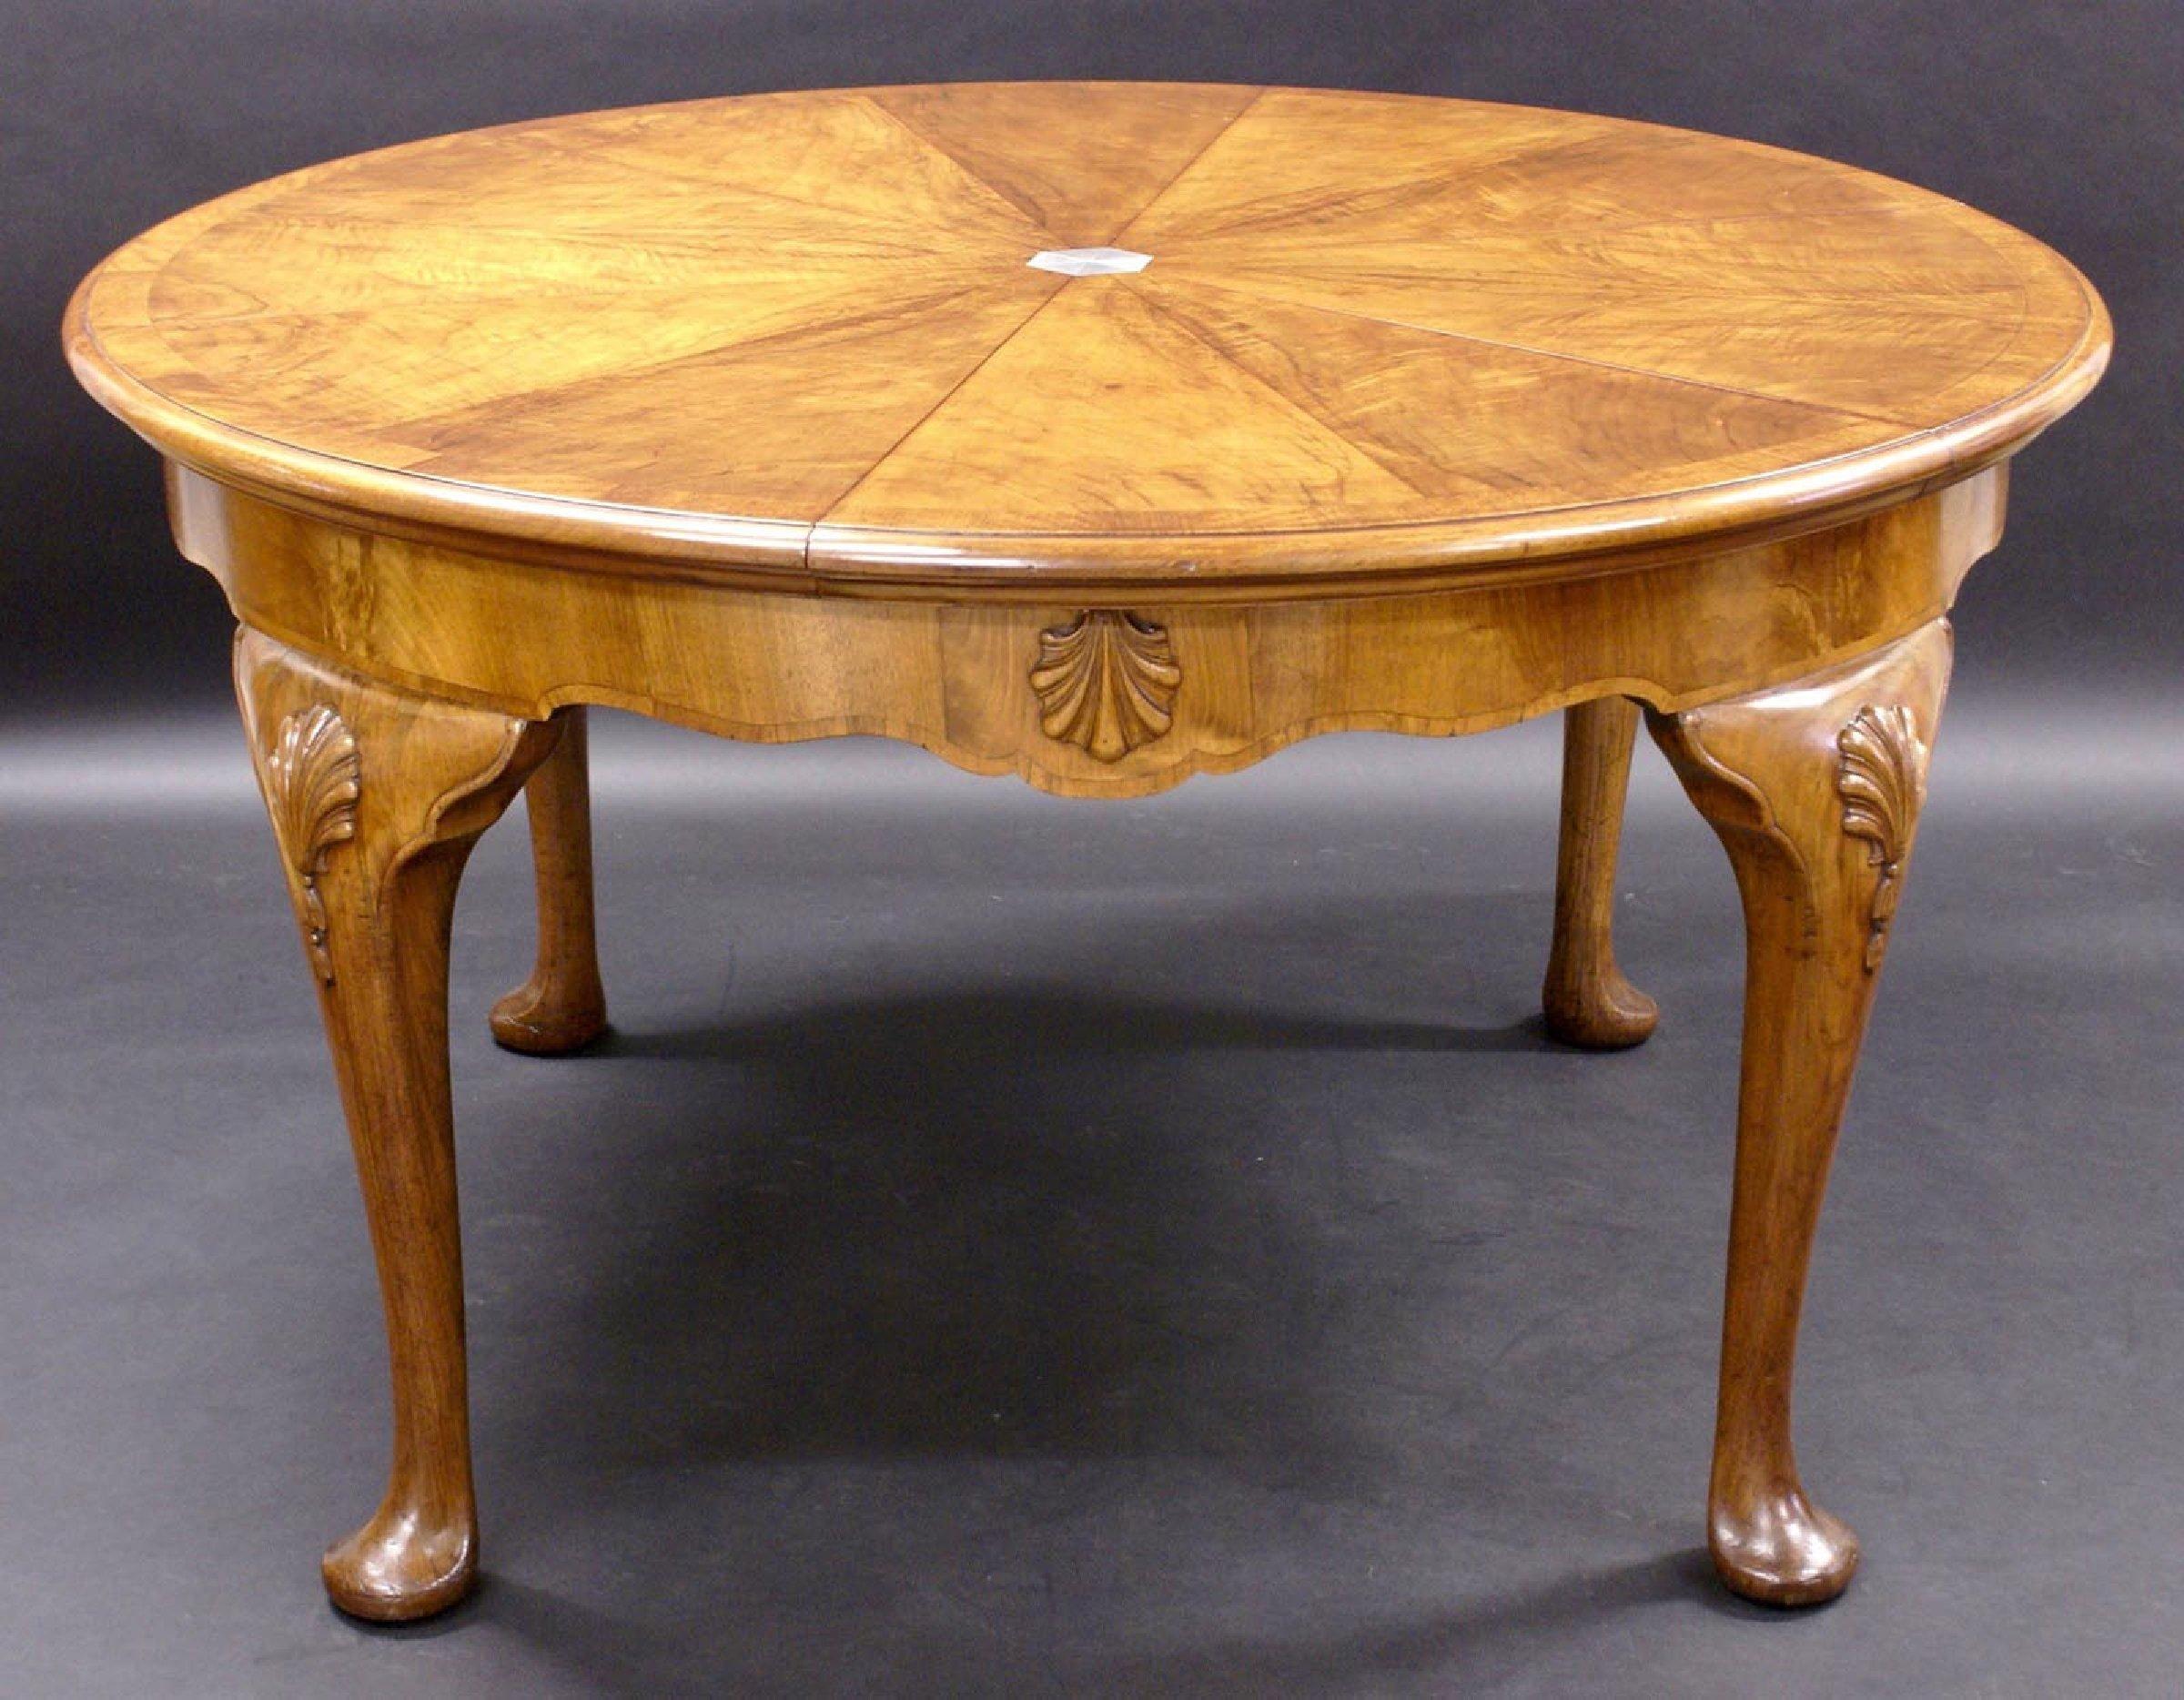 20th Century Figured Walnut Extending Circular Table by Gillows